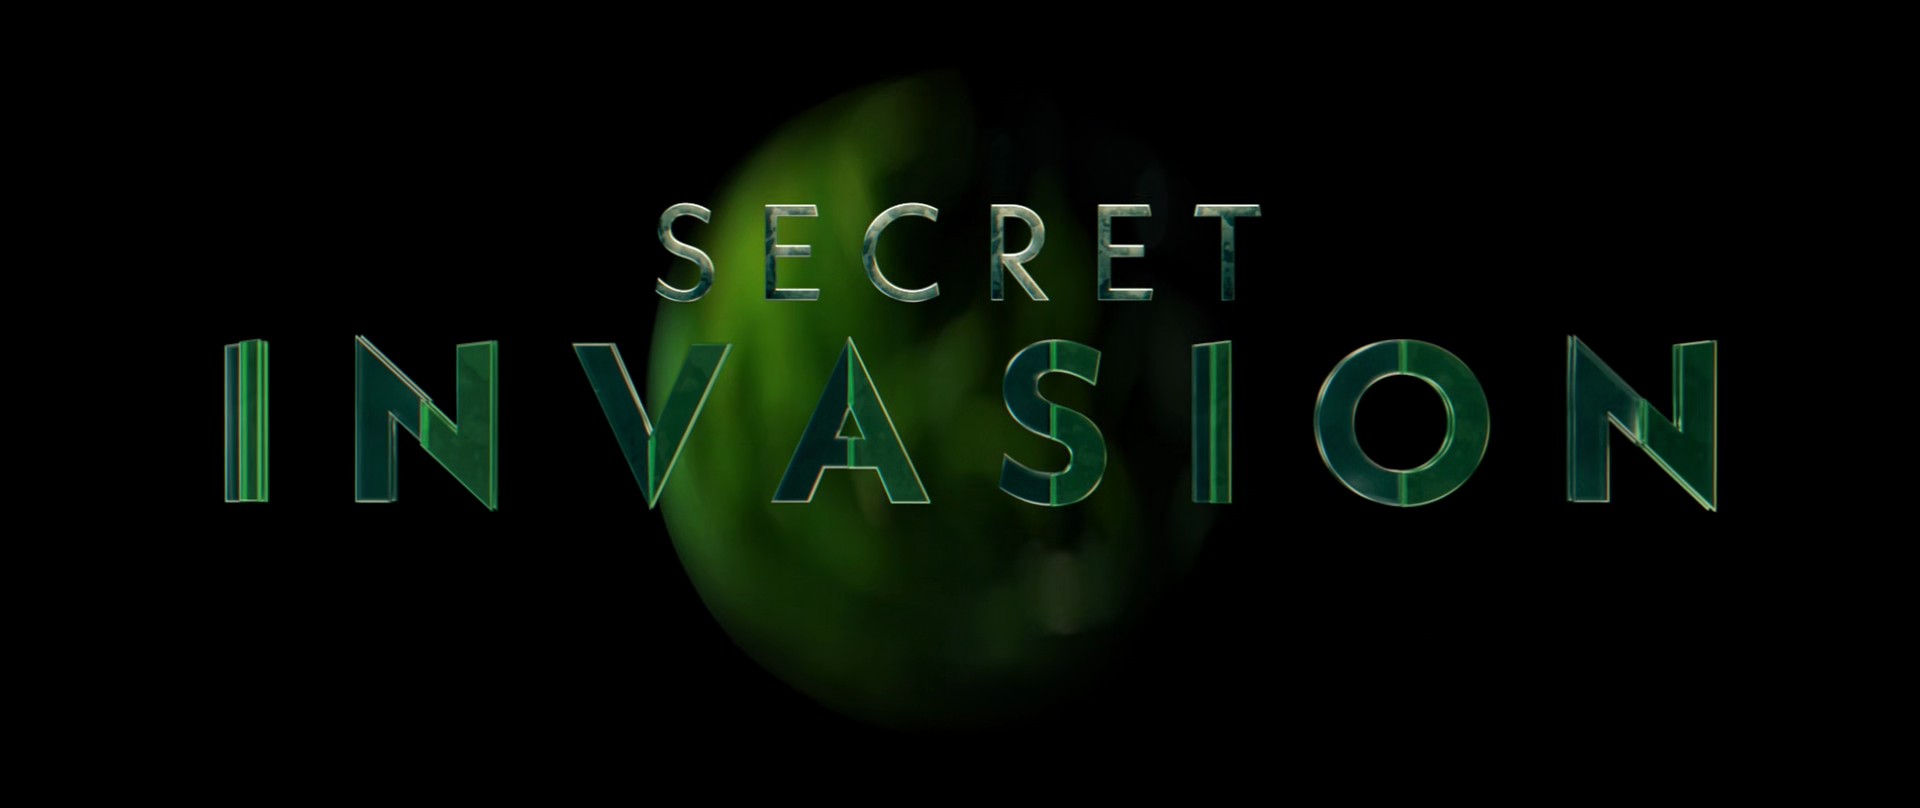 Something crazy happened in Secret Invasion episode 1, and no one's talking  about it